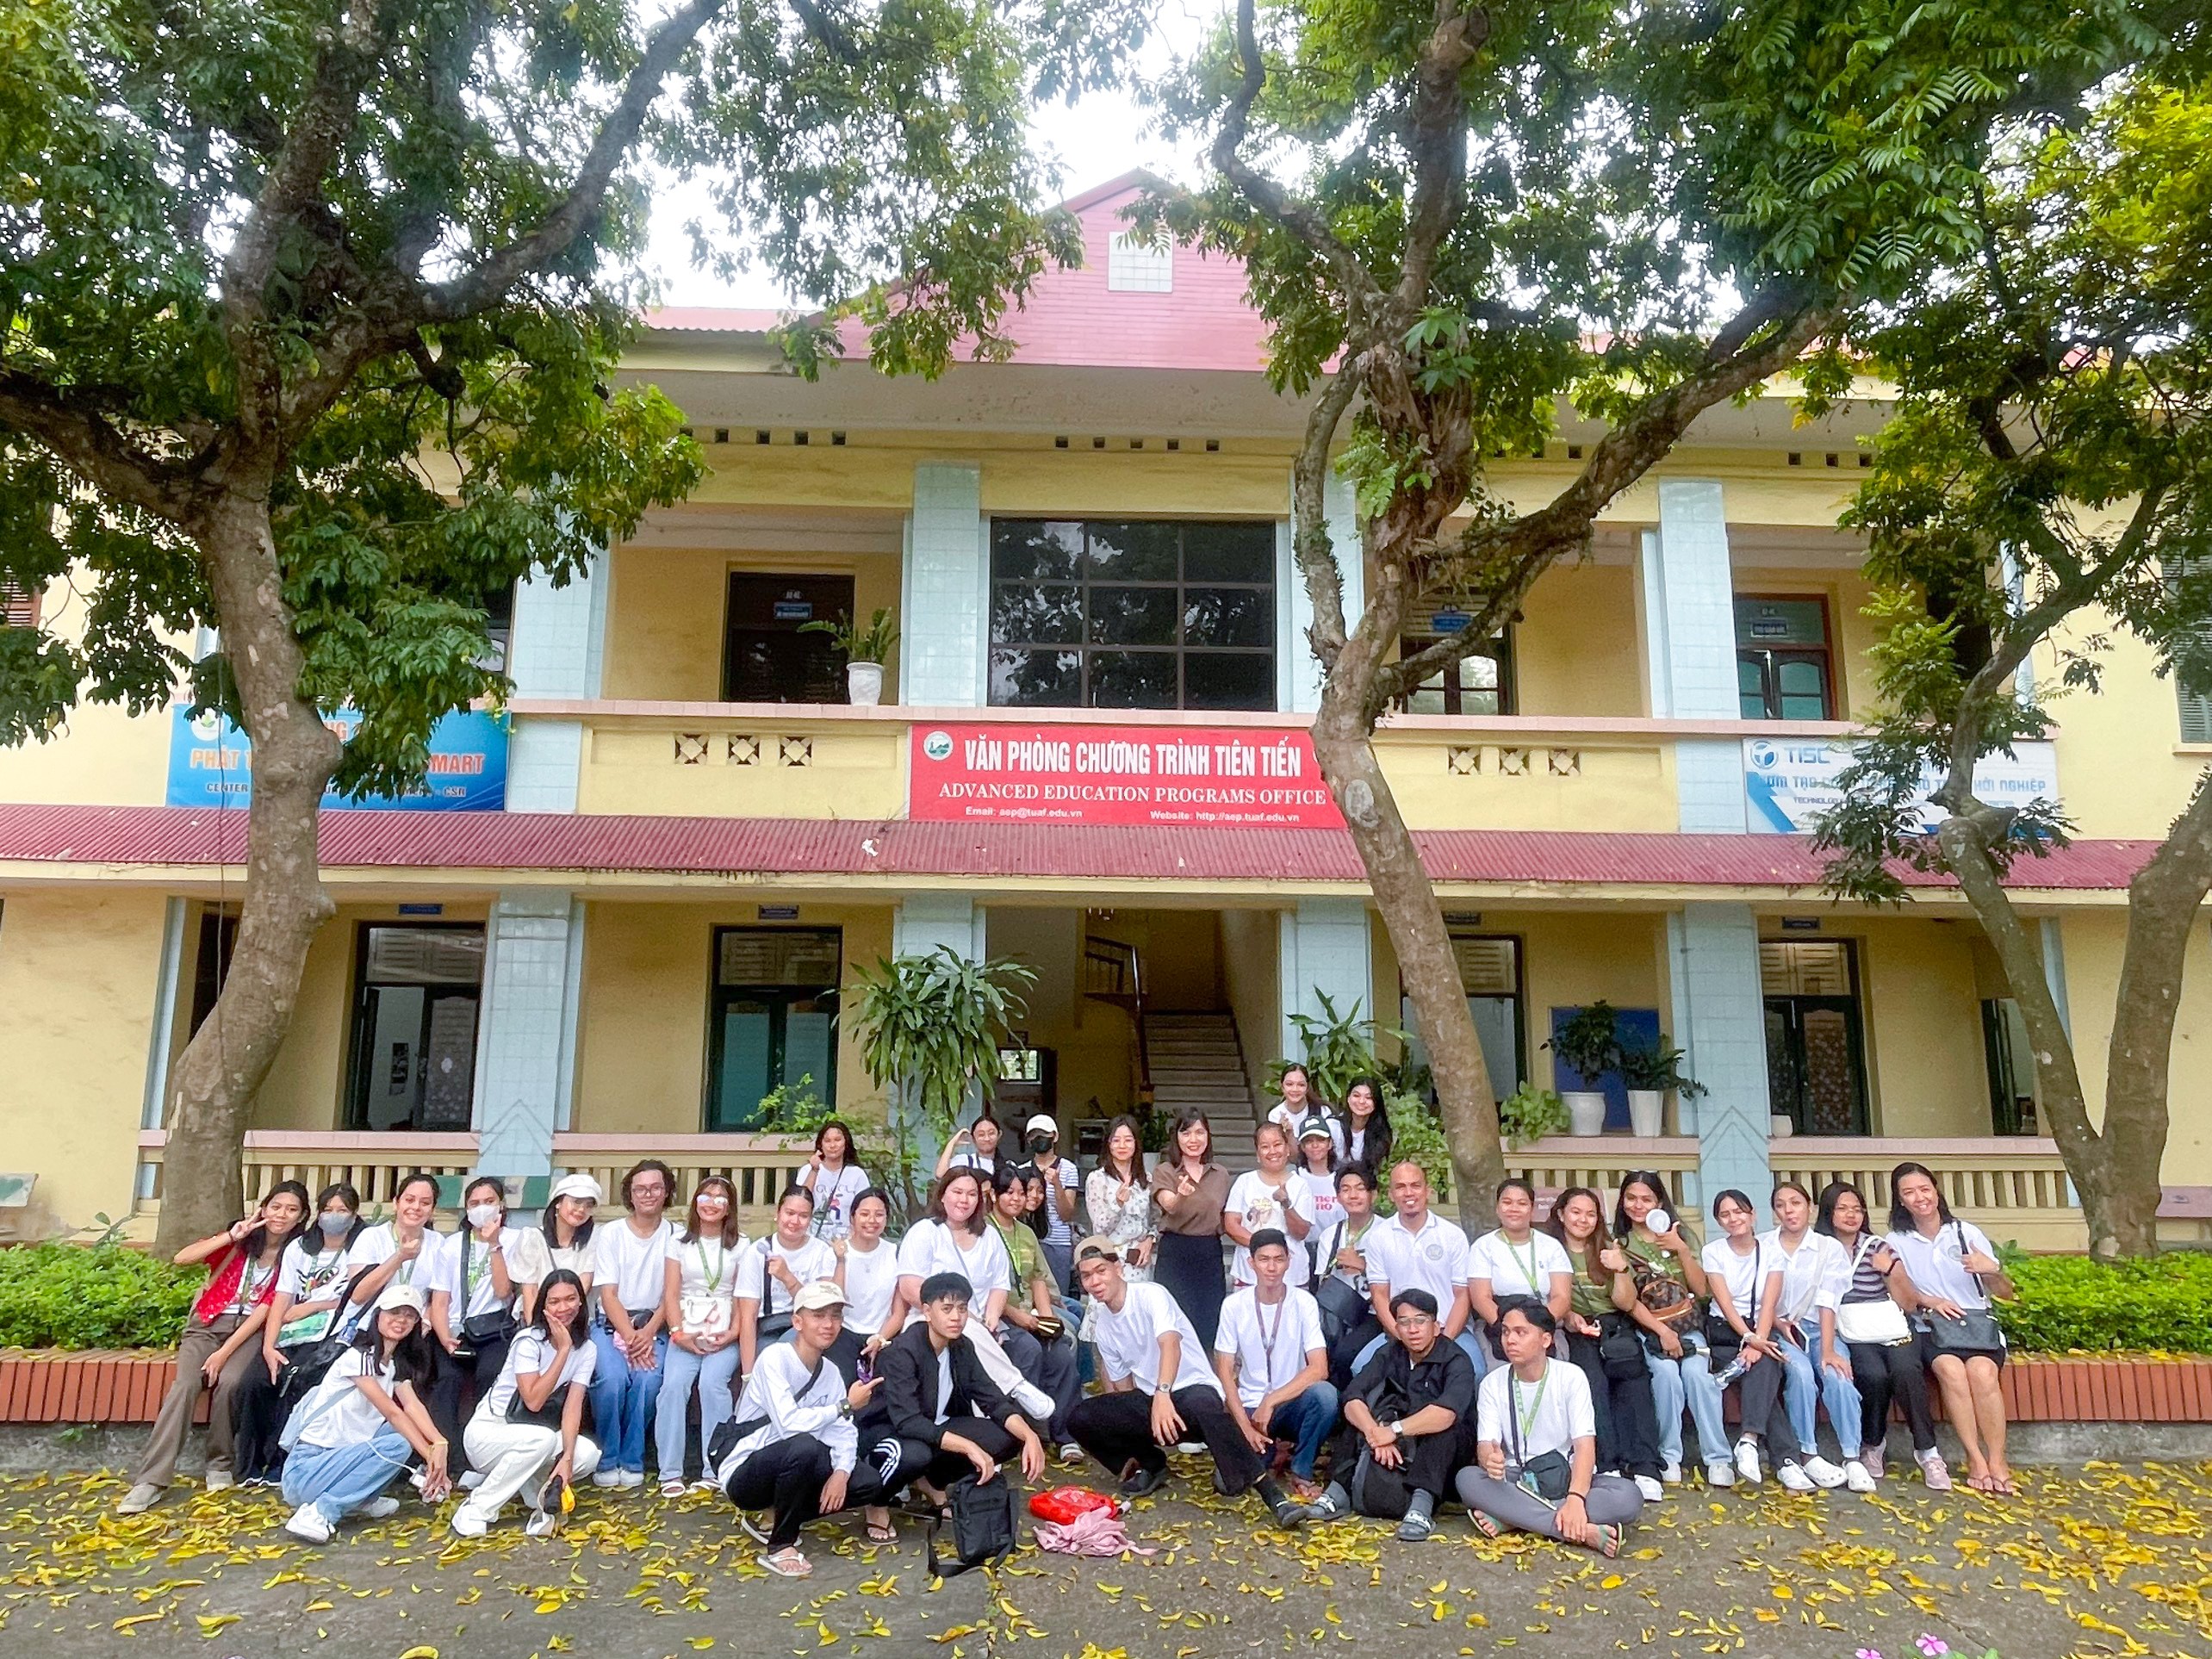 2-WEEK WORK IMMERSION OF LBSHS AND BAYOG SHS STUDENTS